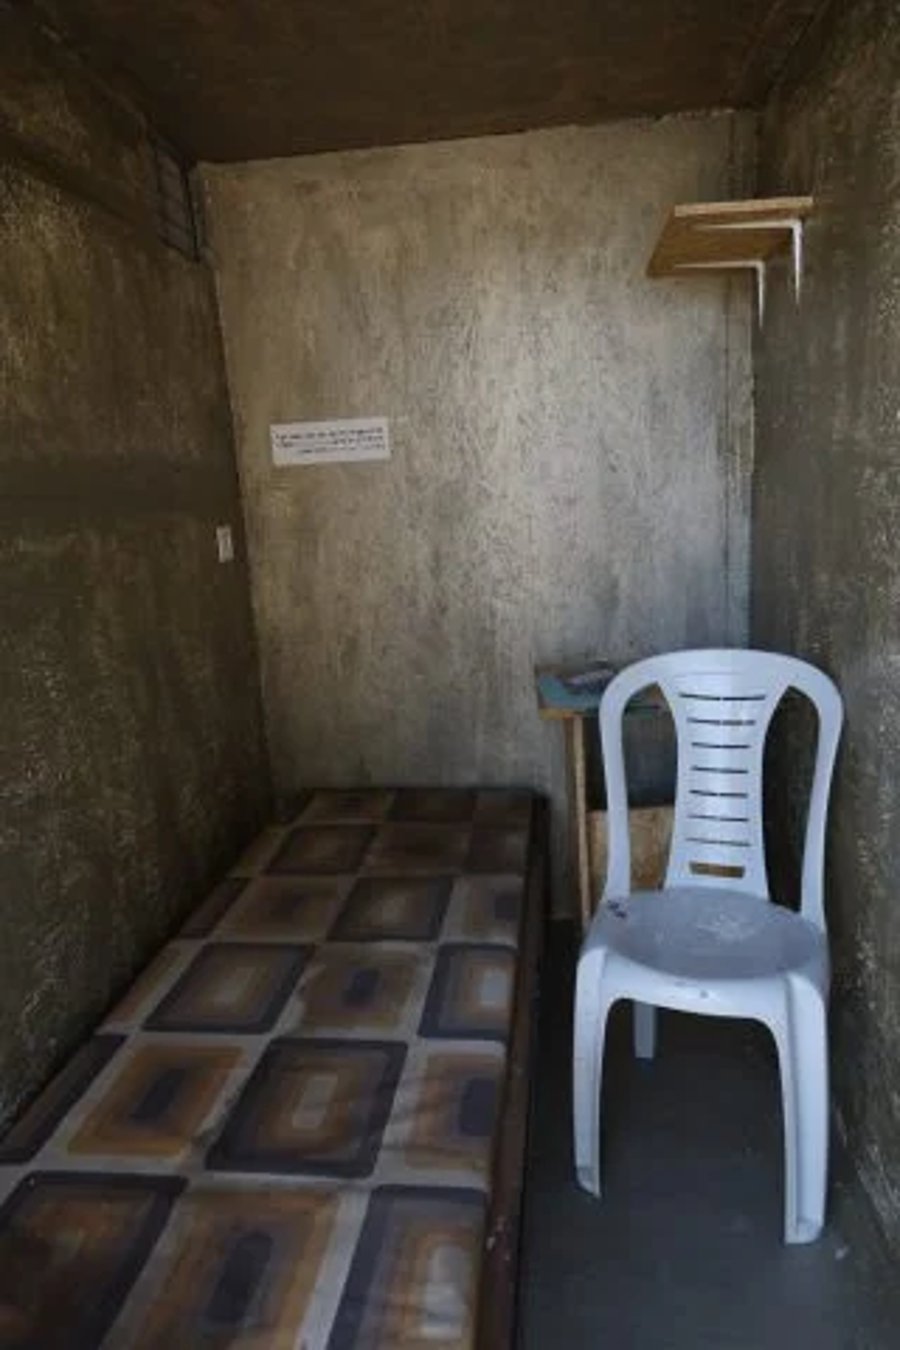 The size of Amiram Ben Uliel's cell in a display in Jerusalem